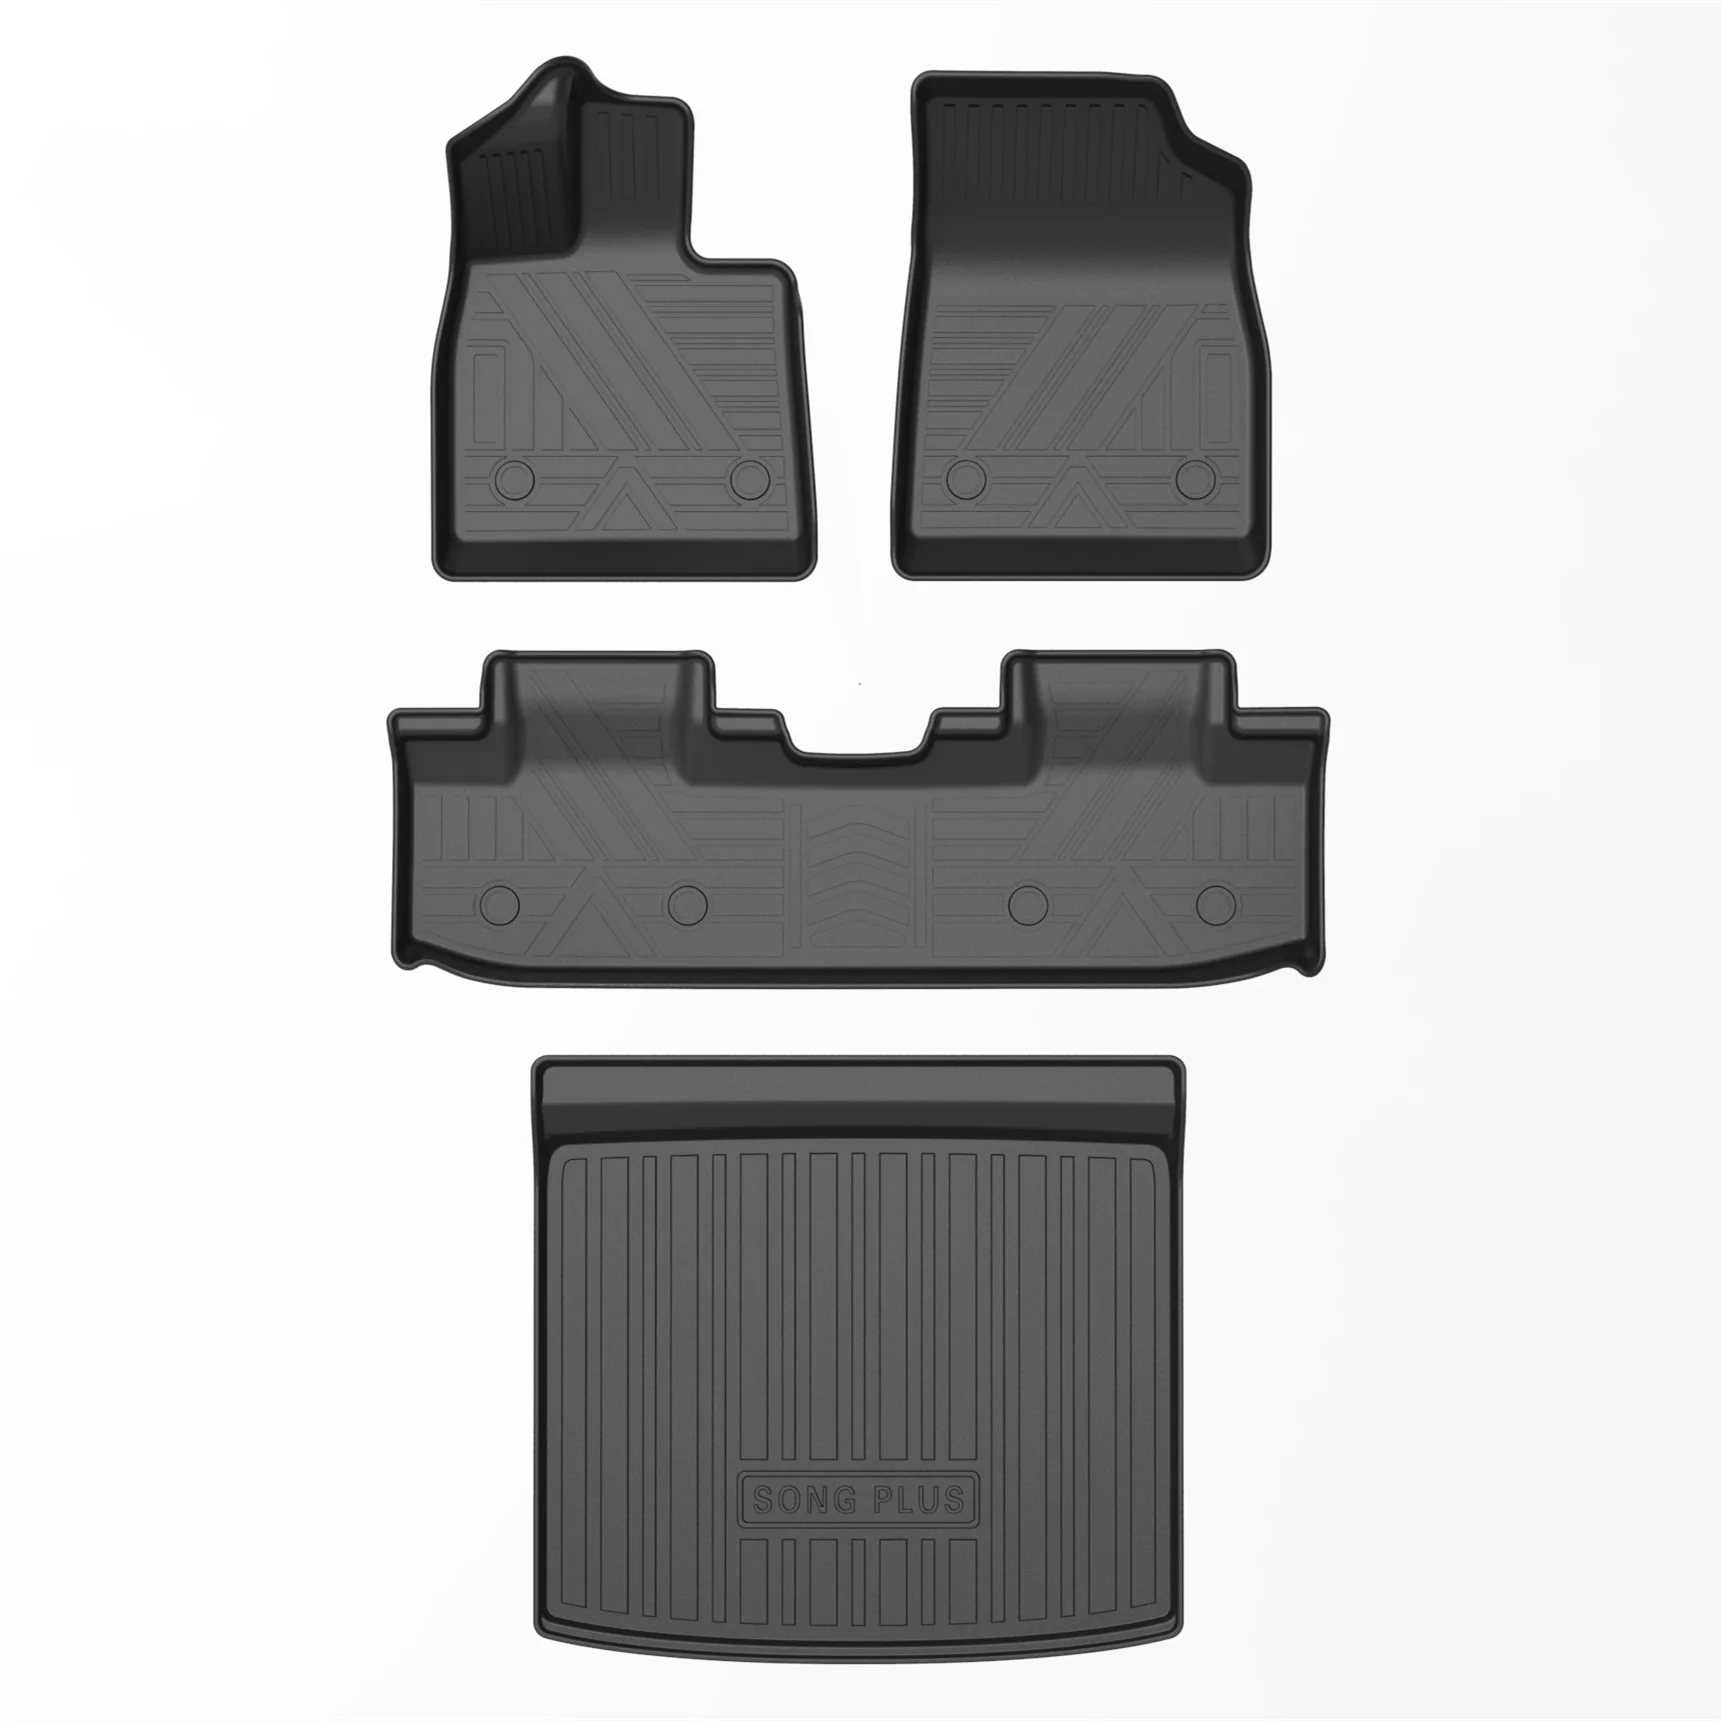 Custom Fit For BYD Car Interior Accessories Car TPE Floor Mat Specific For BYD Song Plus Pro BYD Tang BYD Han EV